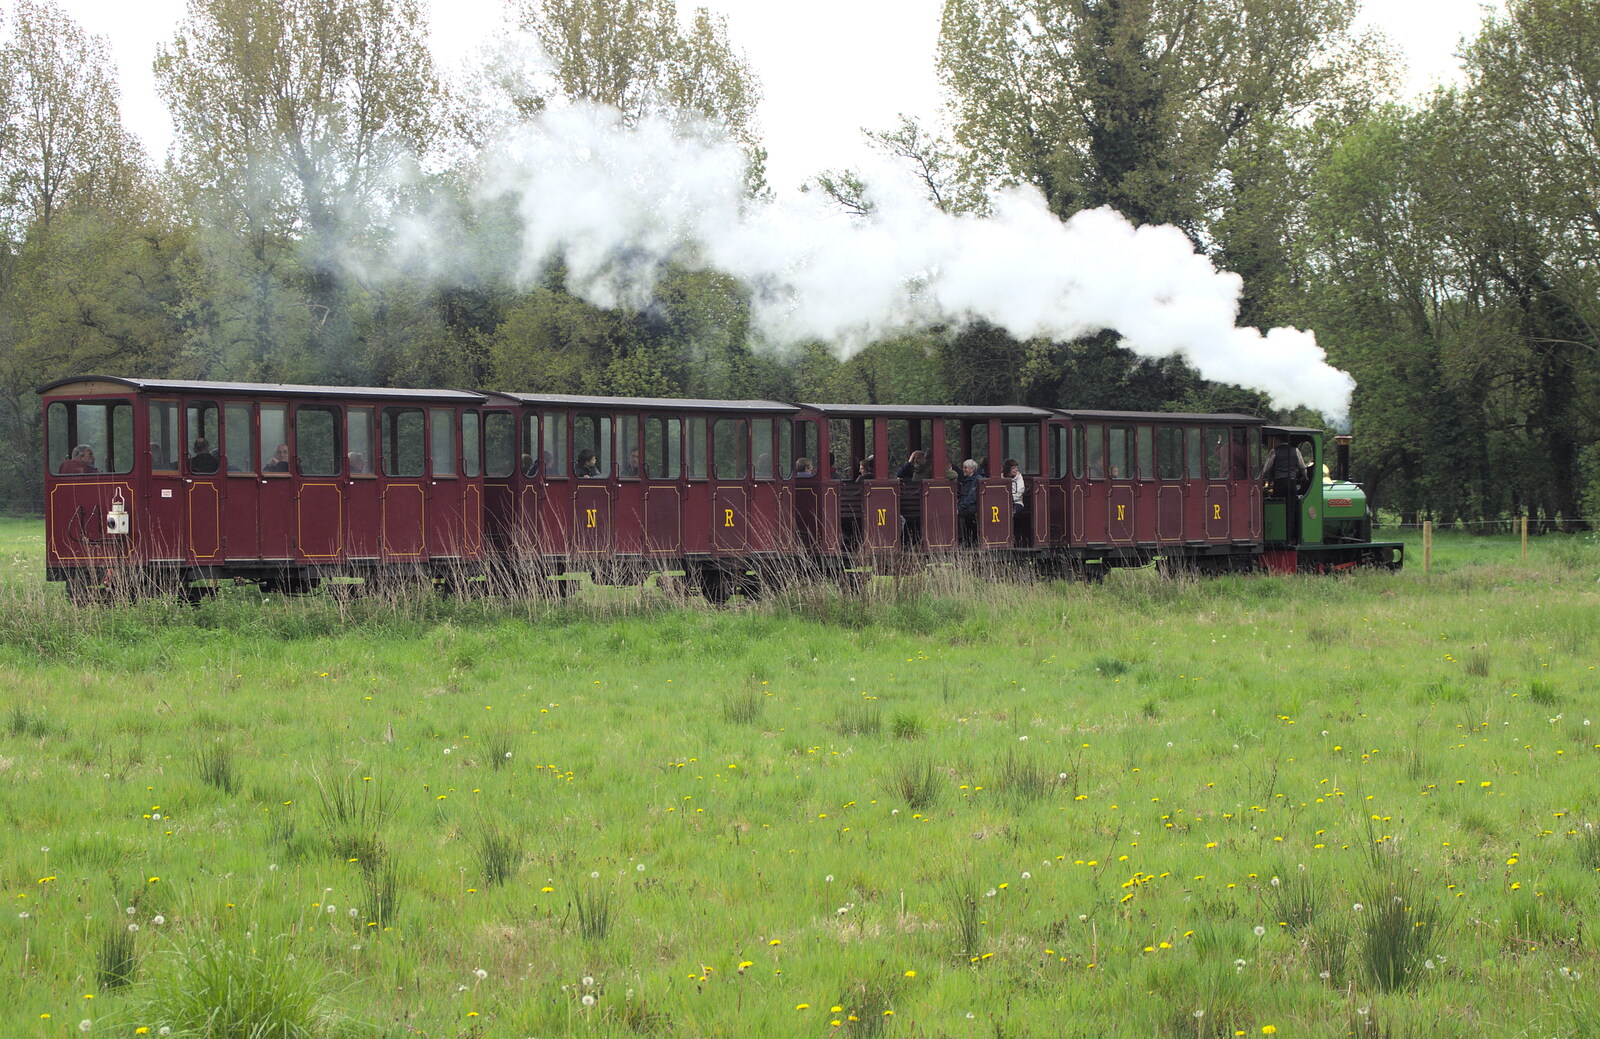 The 'Garden Express' trundles off from A Day at Bressingham Steam and Gardens, Diss, Norfolk - 18th May 2013